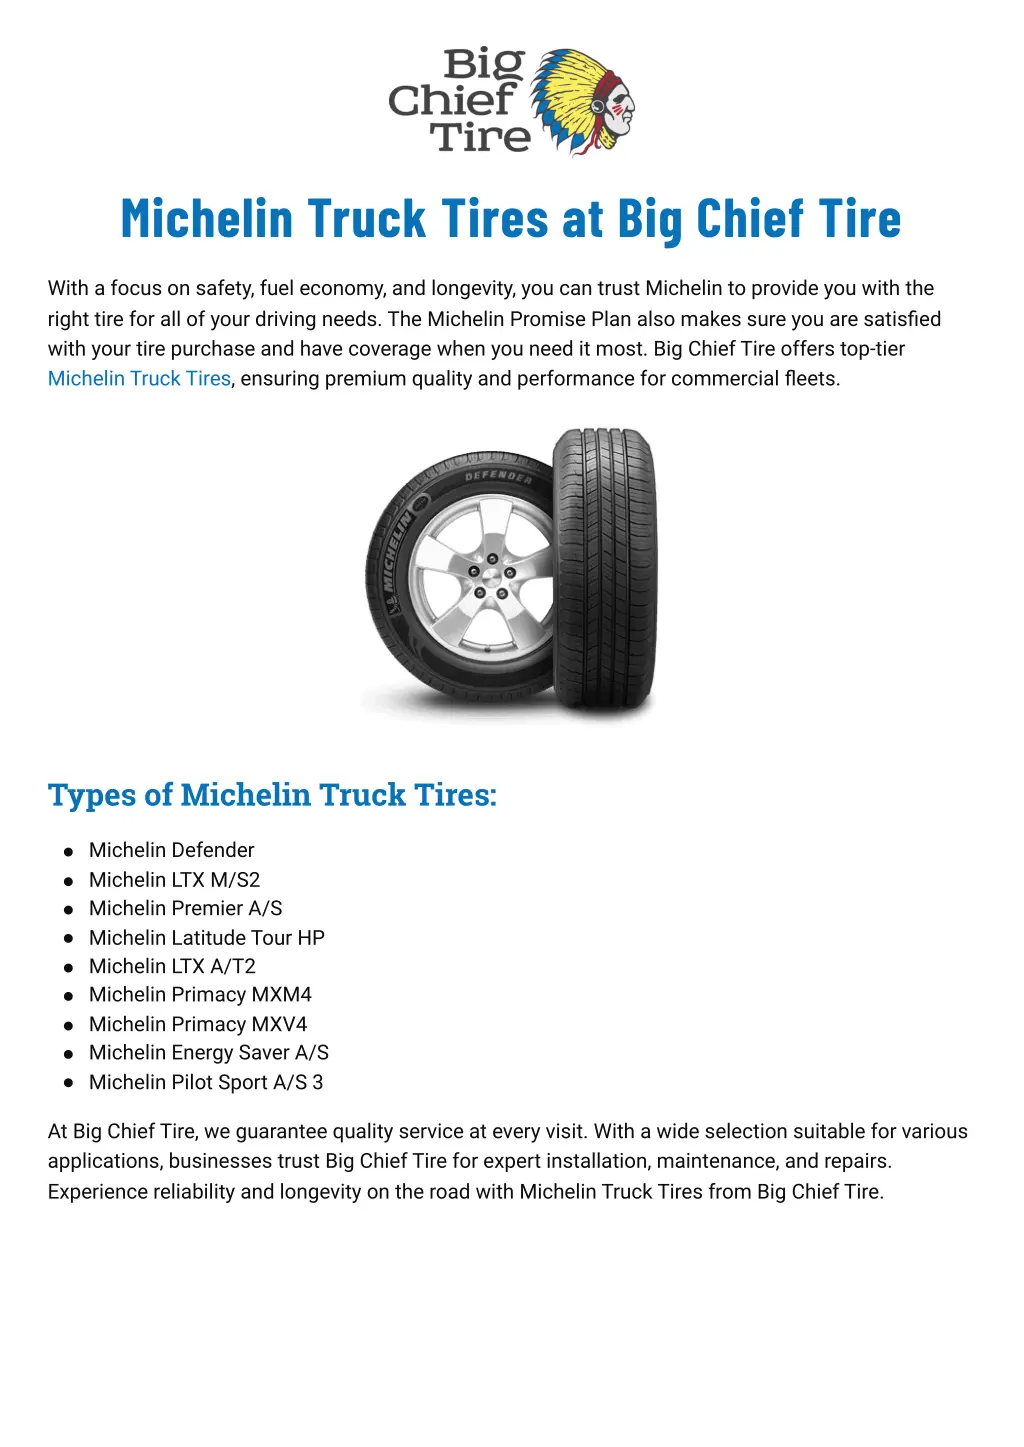 michelin truck tires at big chief tire n.